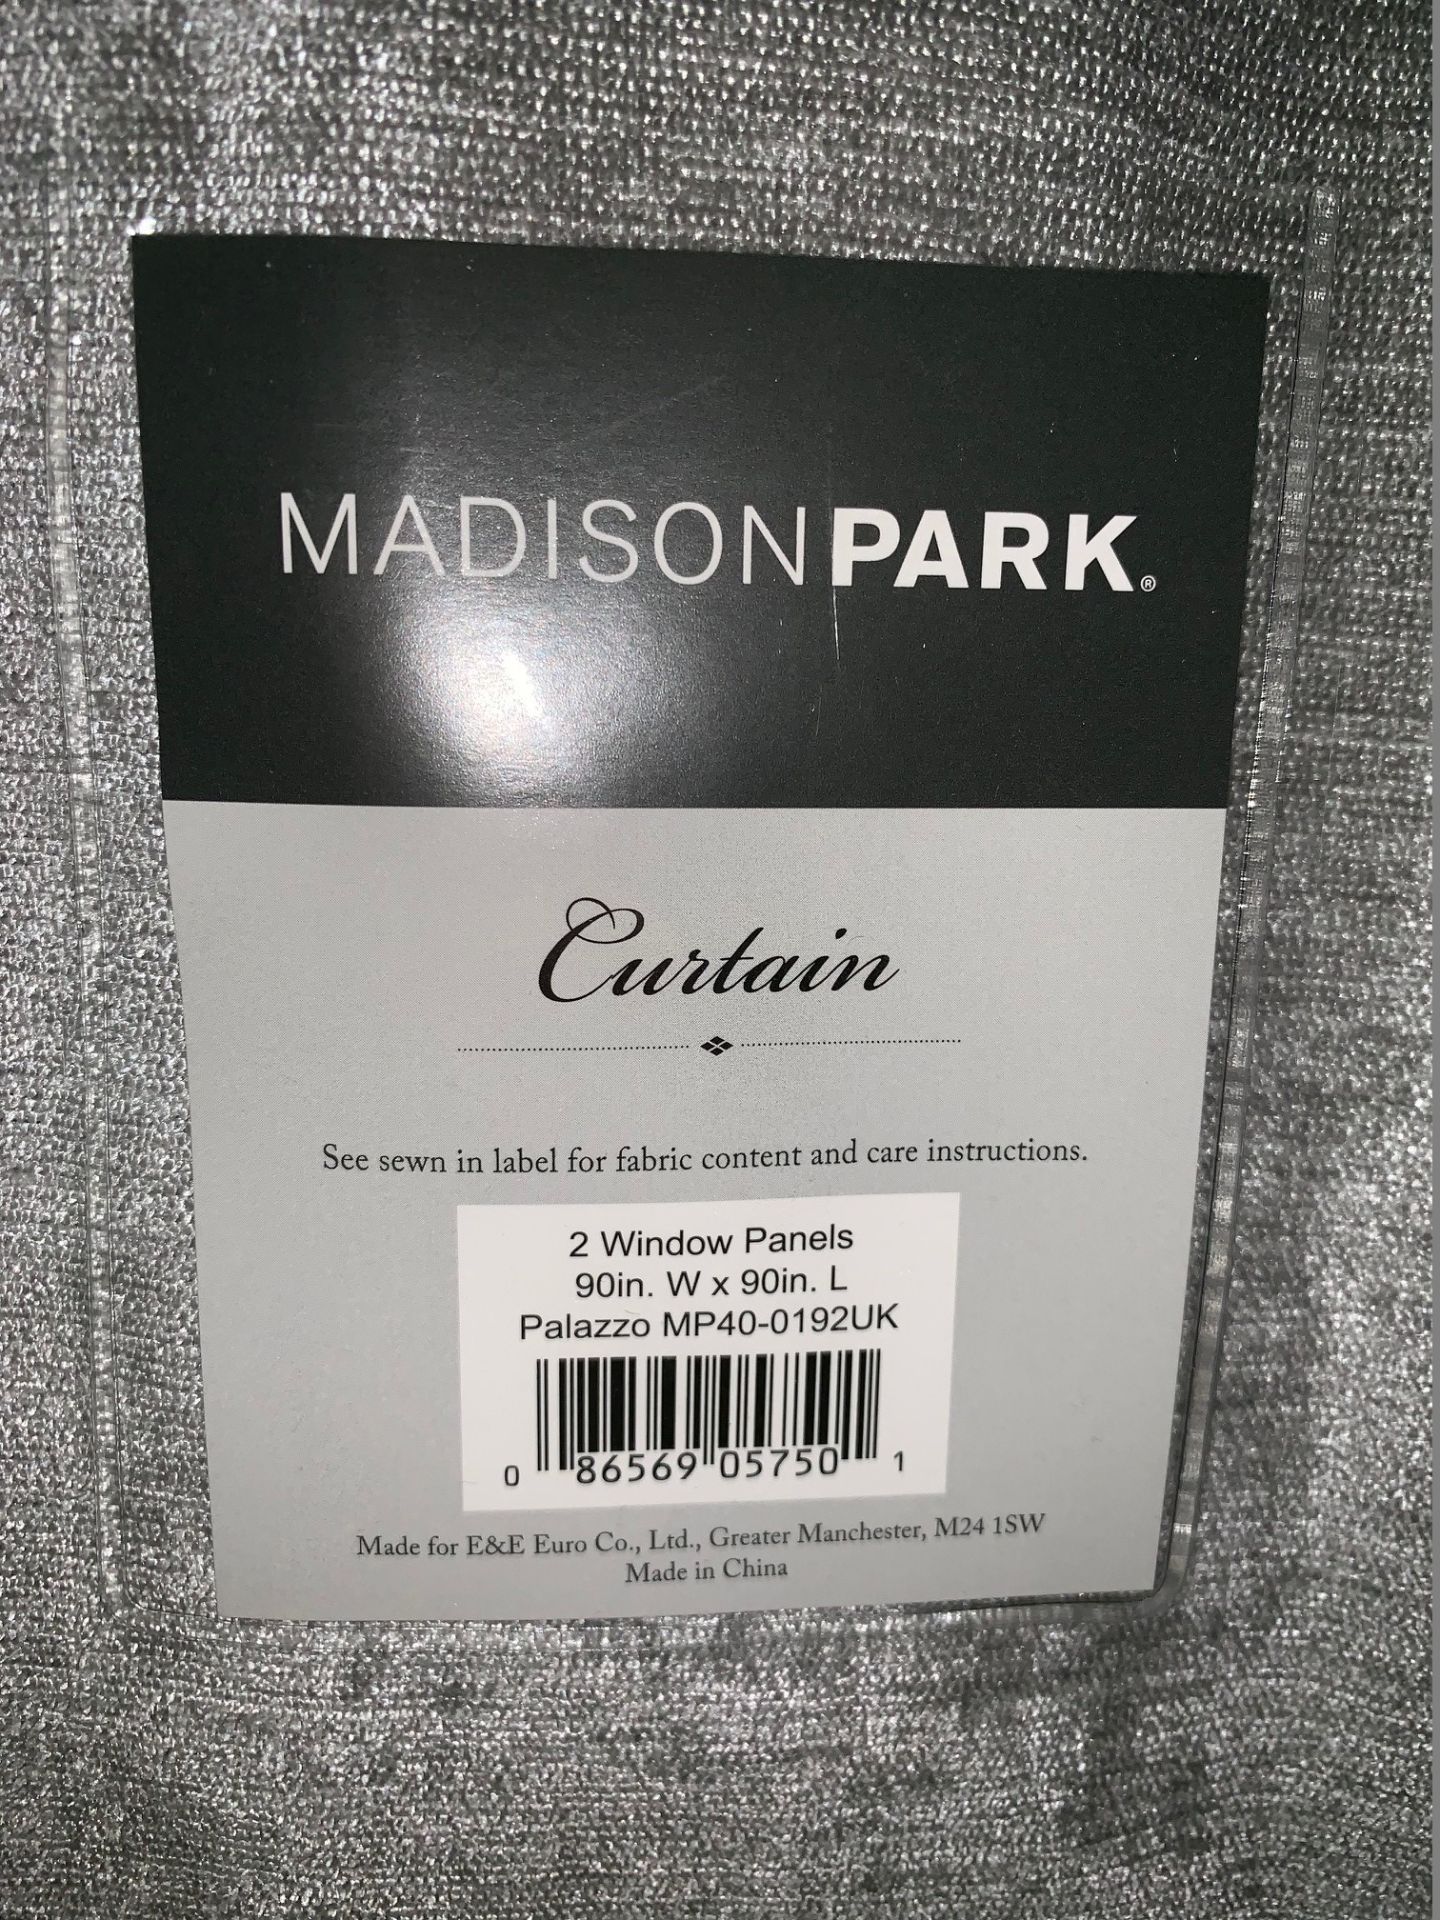 1 x Set of Madison Park Palazzo Chenille Grey Curtains 90x90" - Product Code MP40-0192UK (Brand - Image 3 of 3